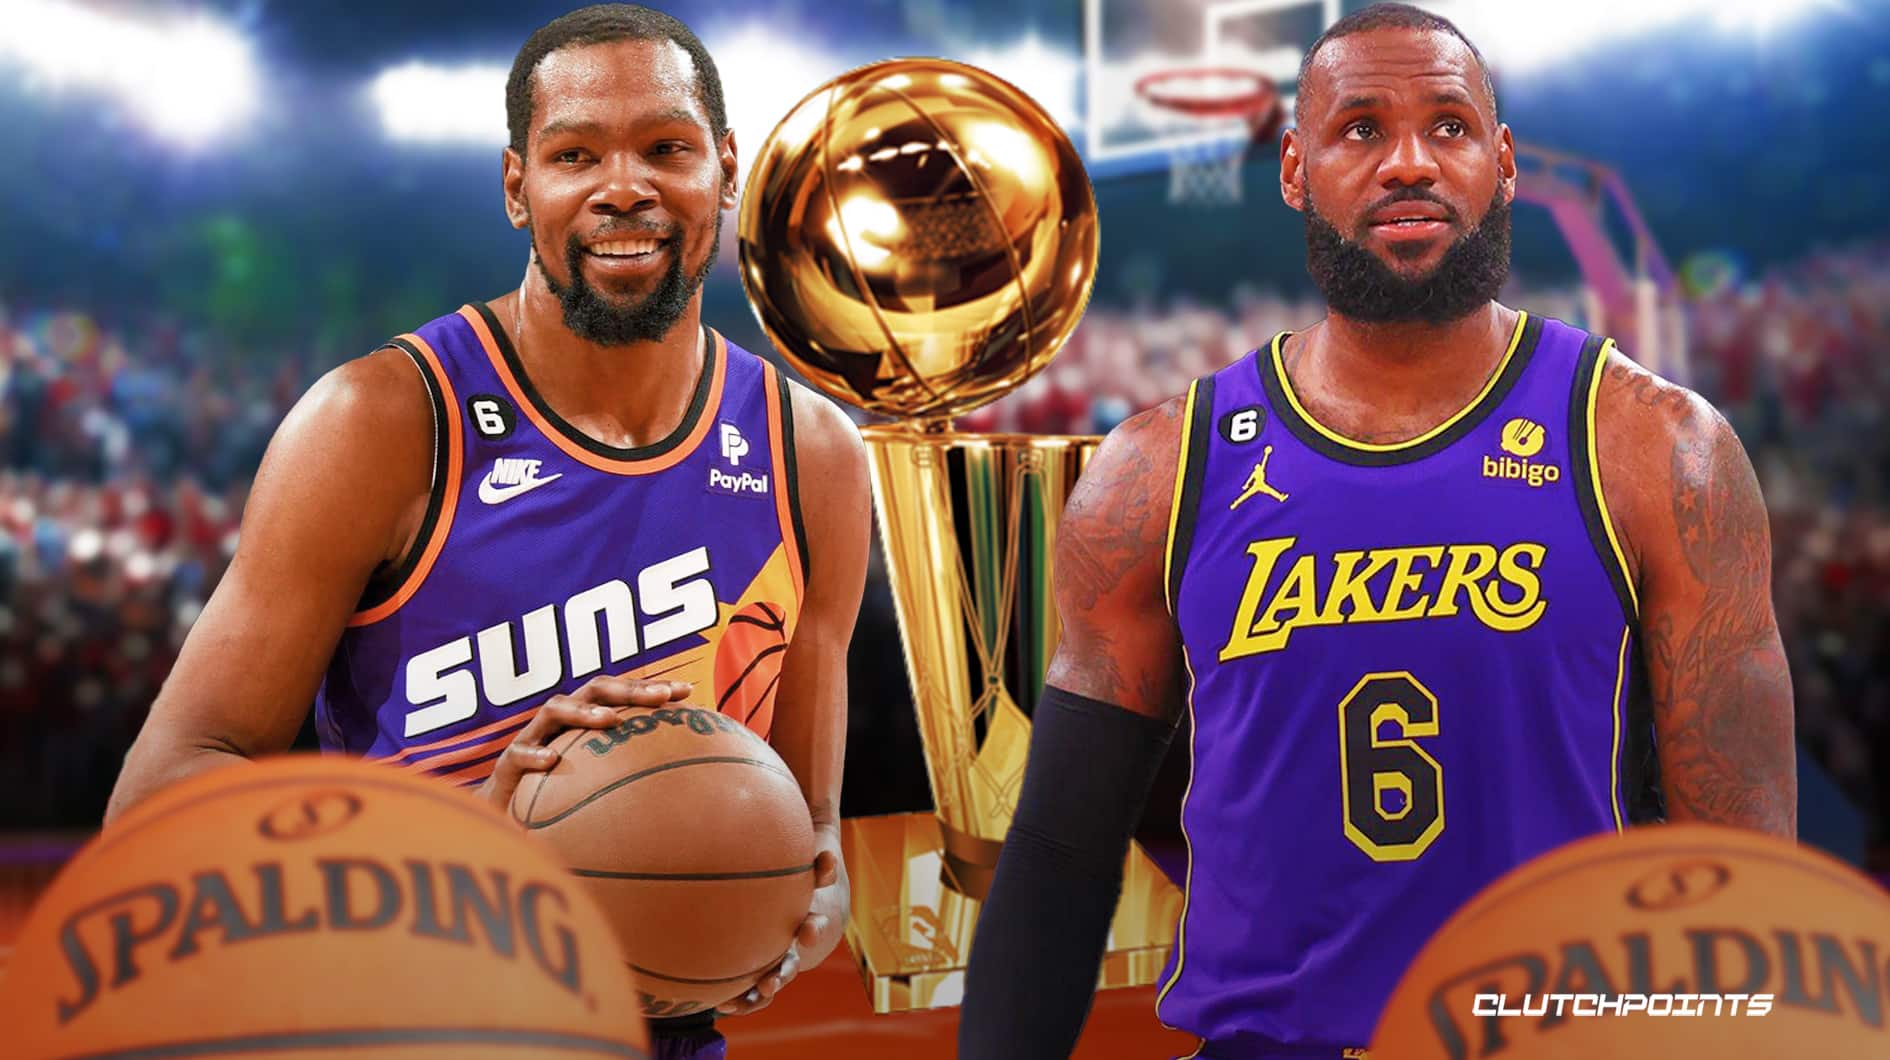 The NBA's In-Season Tournament is finally set to begin, giving